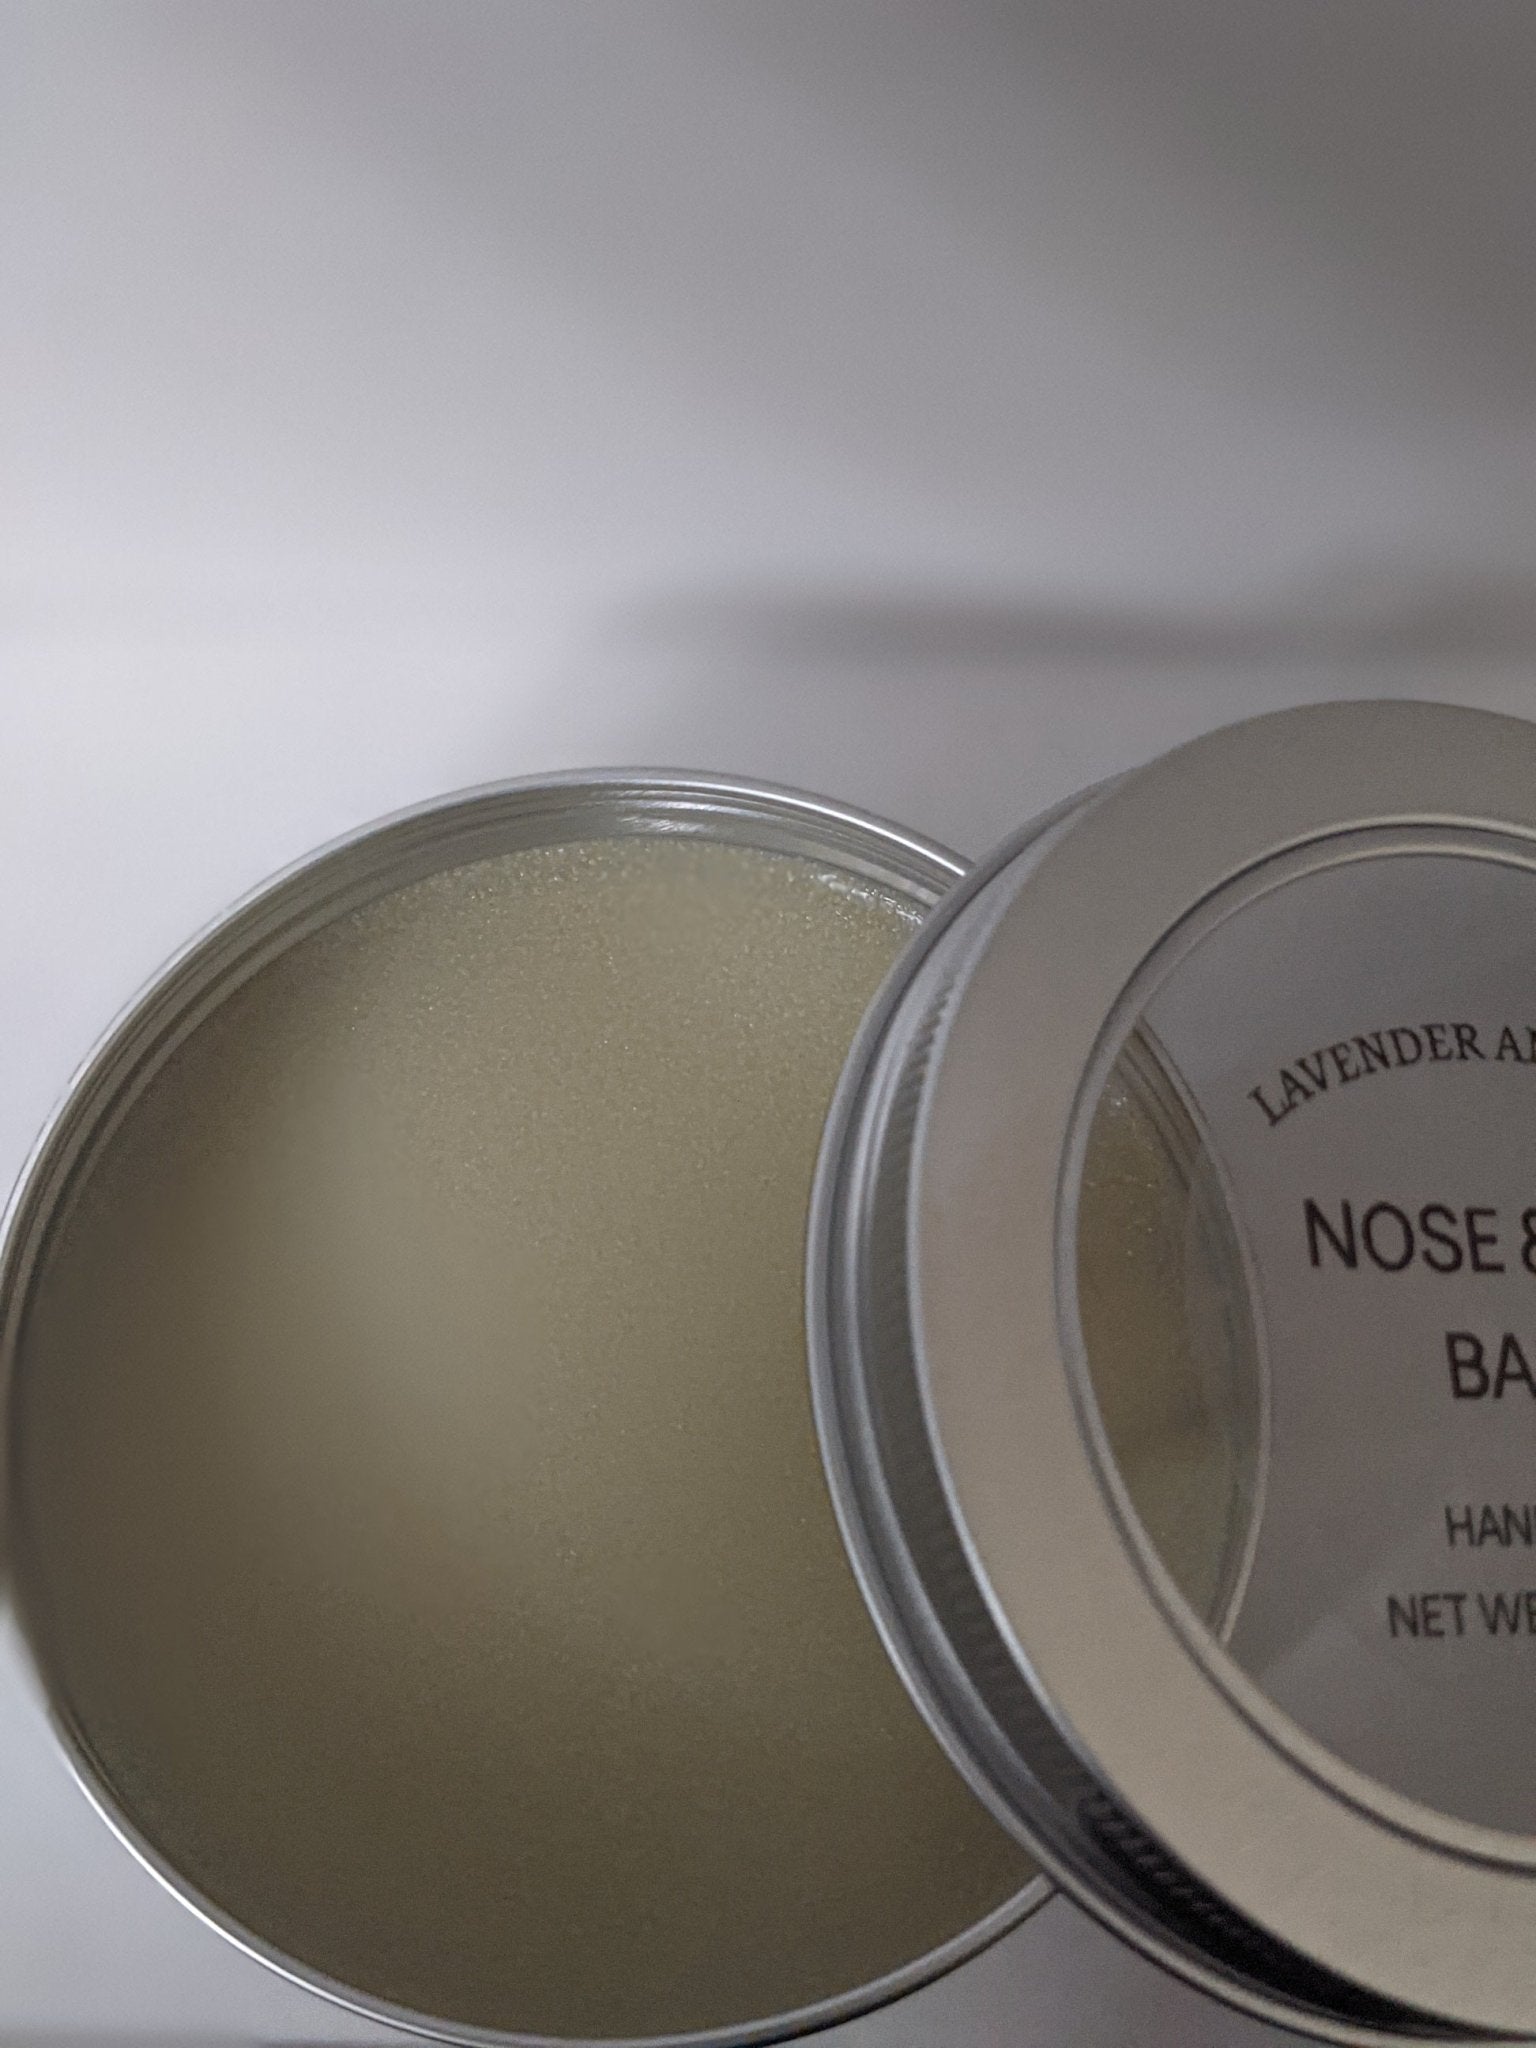 PUPPY NOSE AND PAW BALM - LAVENDER AND WATER